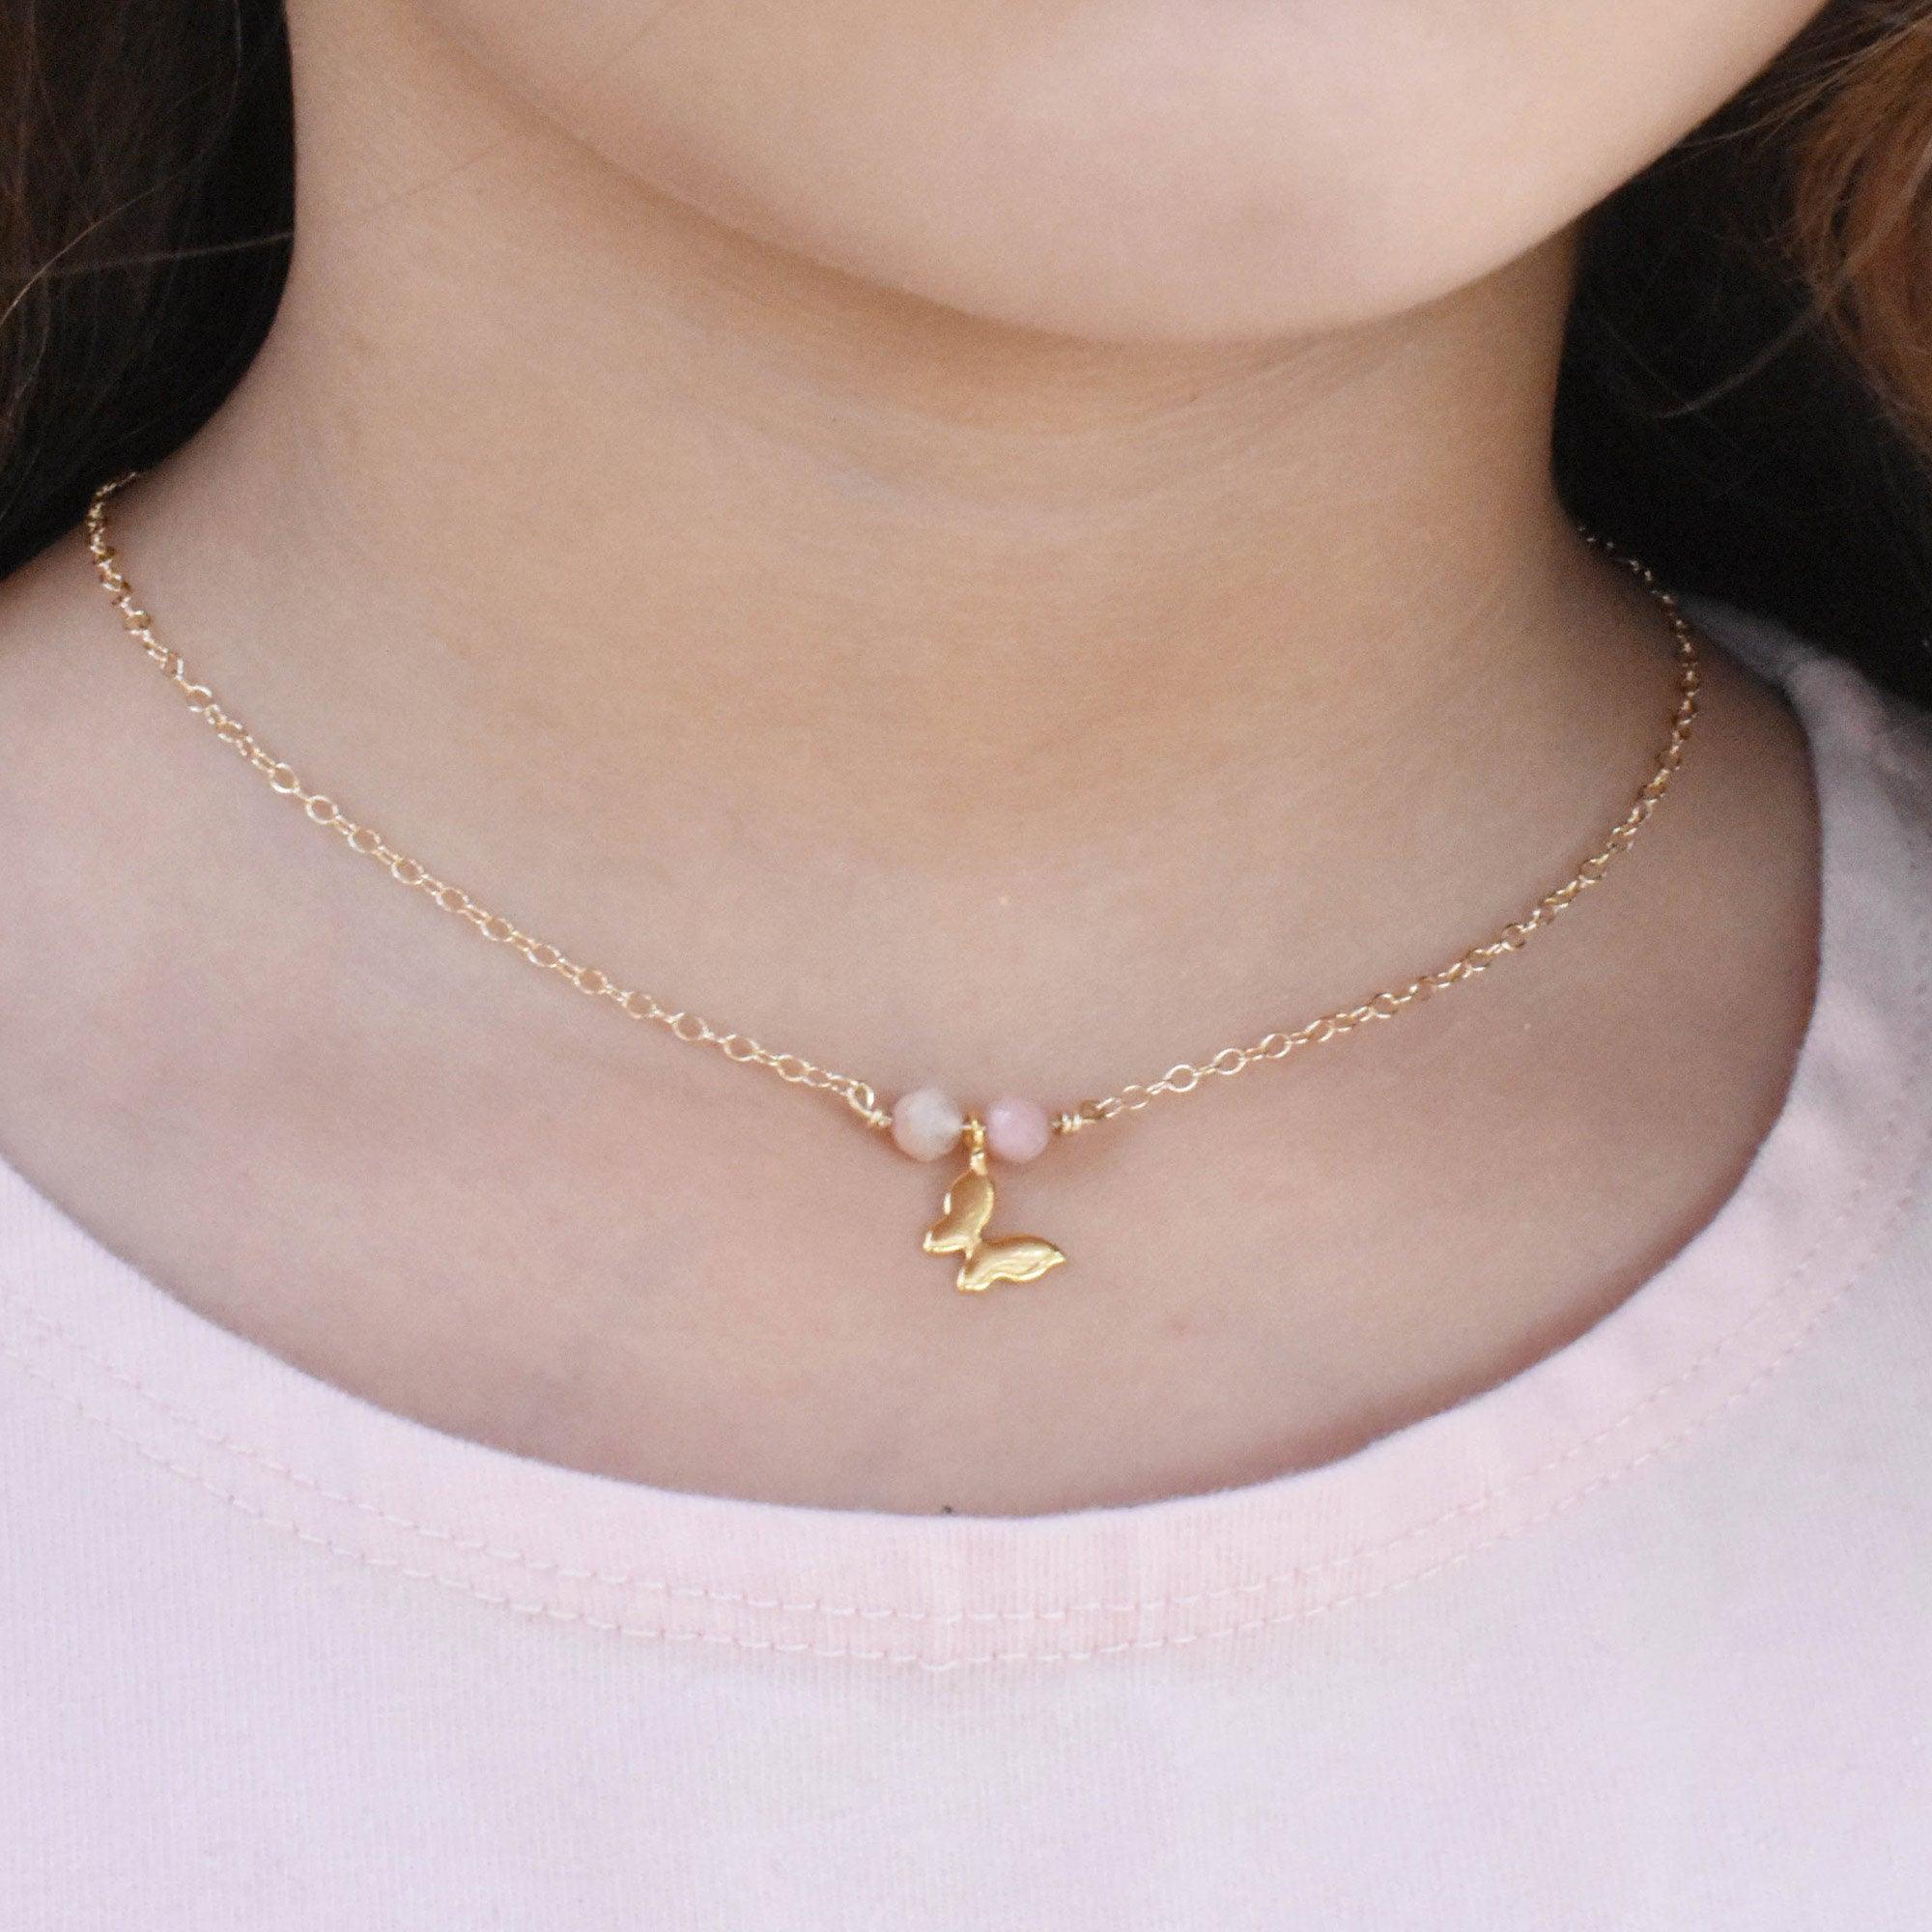 Dainty children's butterfly necklace with choice of pink opals or amethyst gemstones. This necklace is part of the children's collection. It features a gold-filled chain and your selection of semi precious healing gemstone crystals that are ideal for children for their soothing energy.